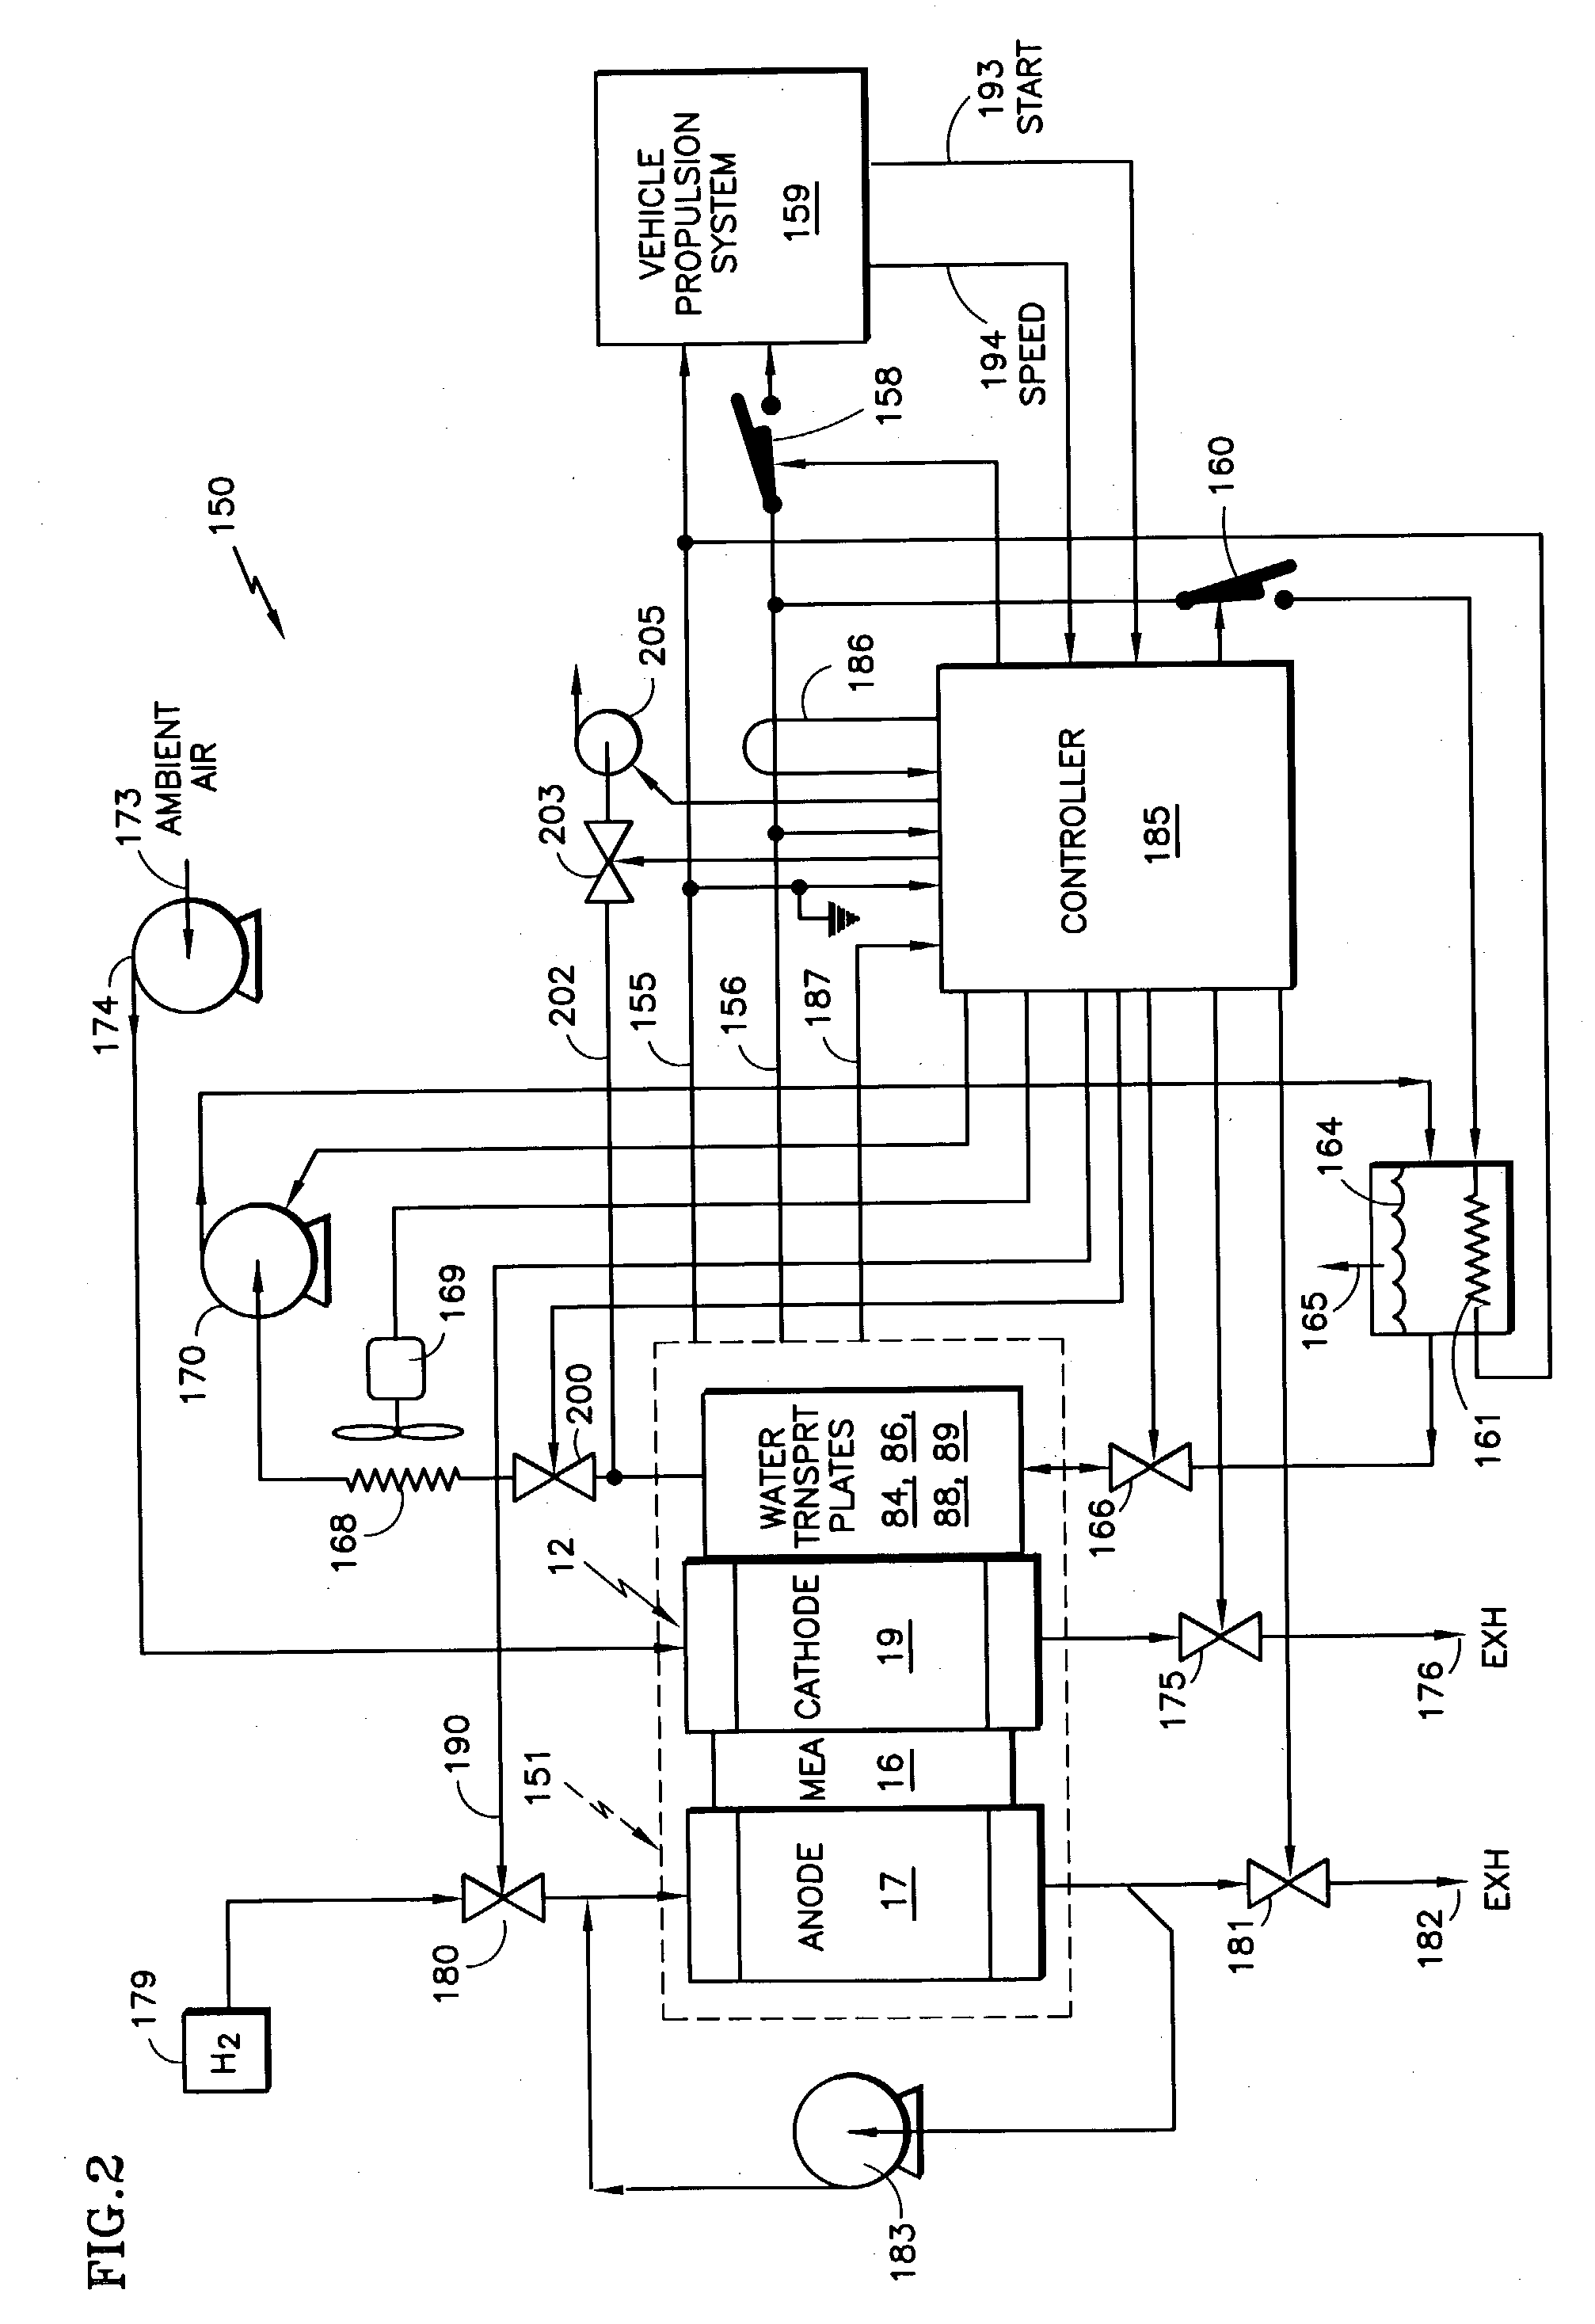 Vacuum assisted startup of a fuel cell at sub-freezing temperature